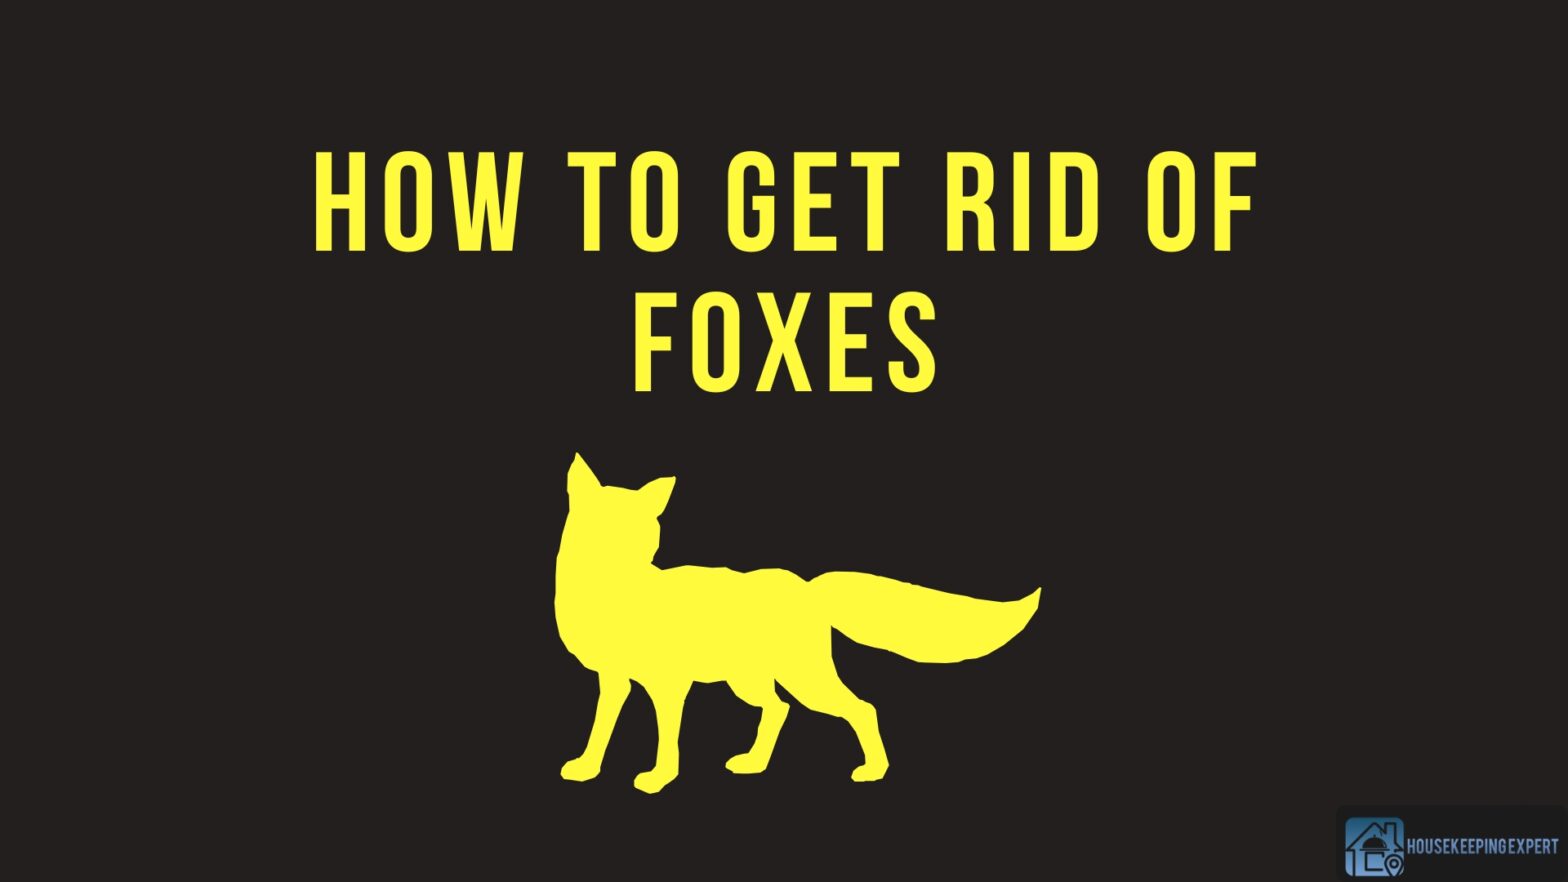 How To Get Rid Of Foxes